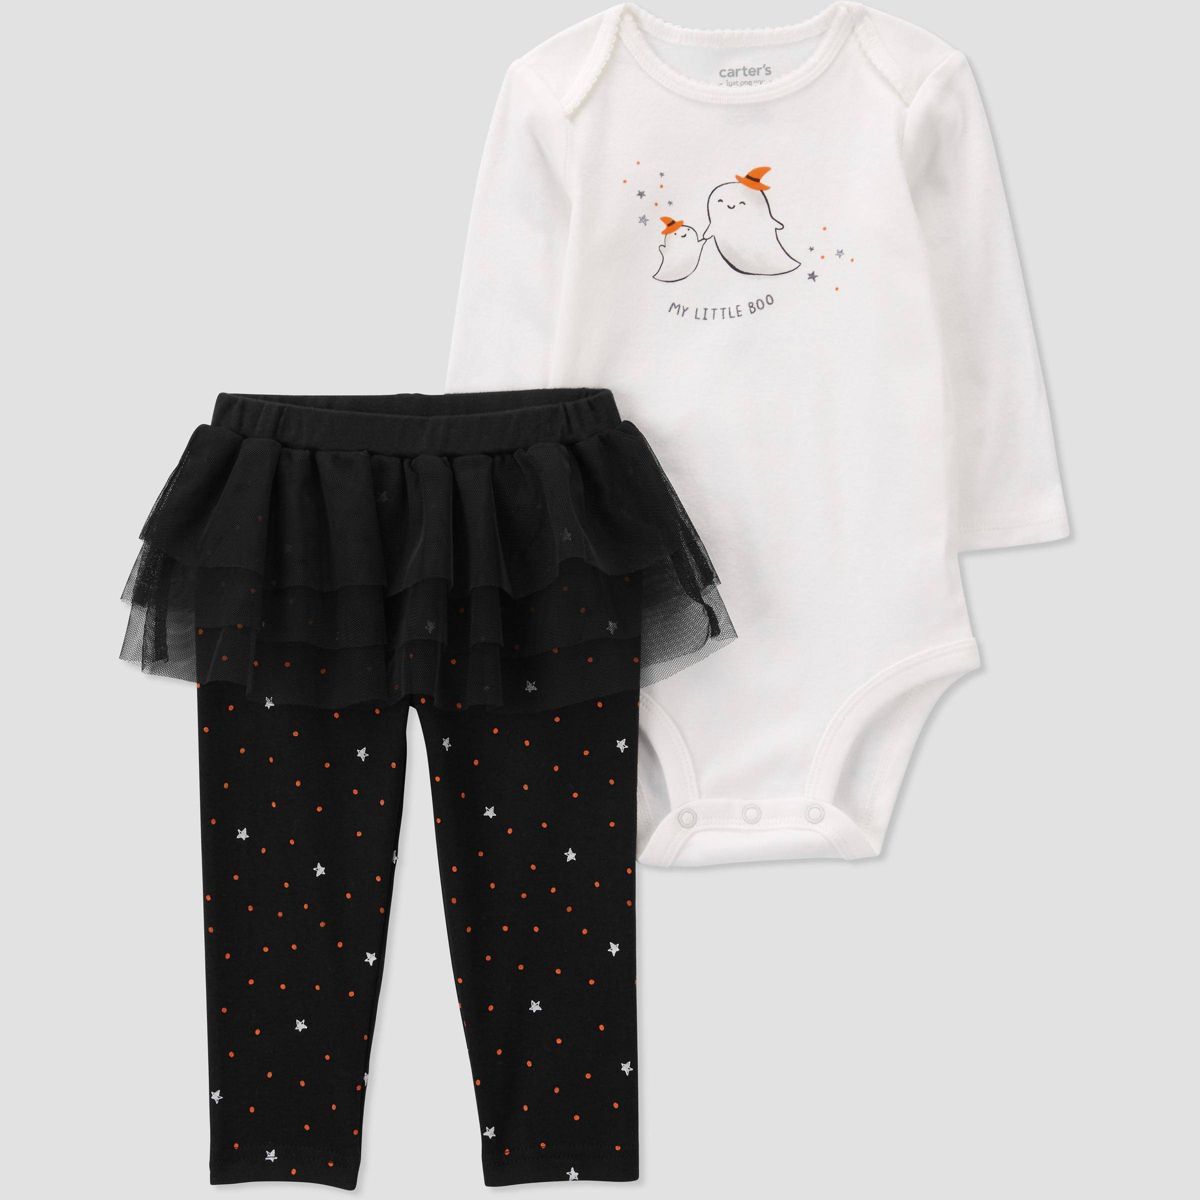 Carter's Just One You® Baby 'My Little Boo' Halloween Top and Bottom Set - Black/White | Target